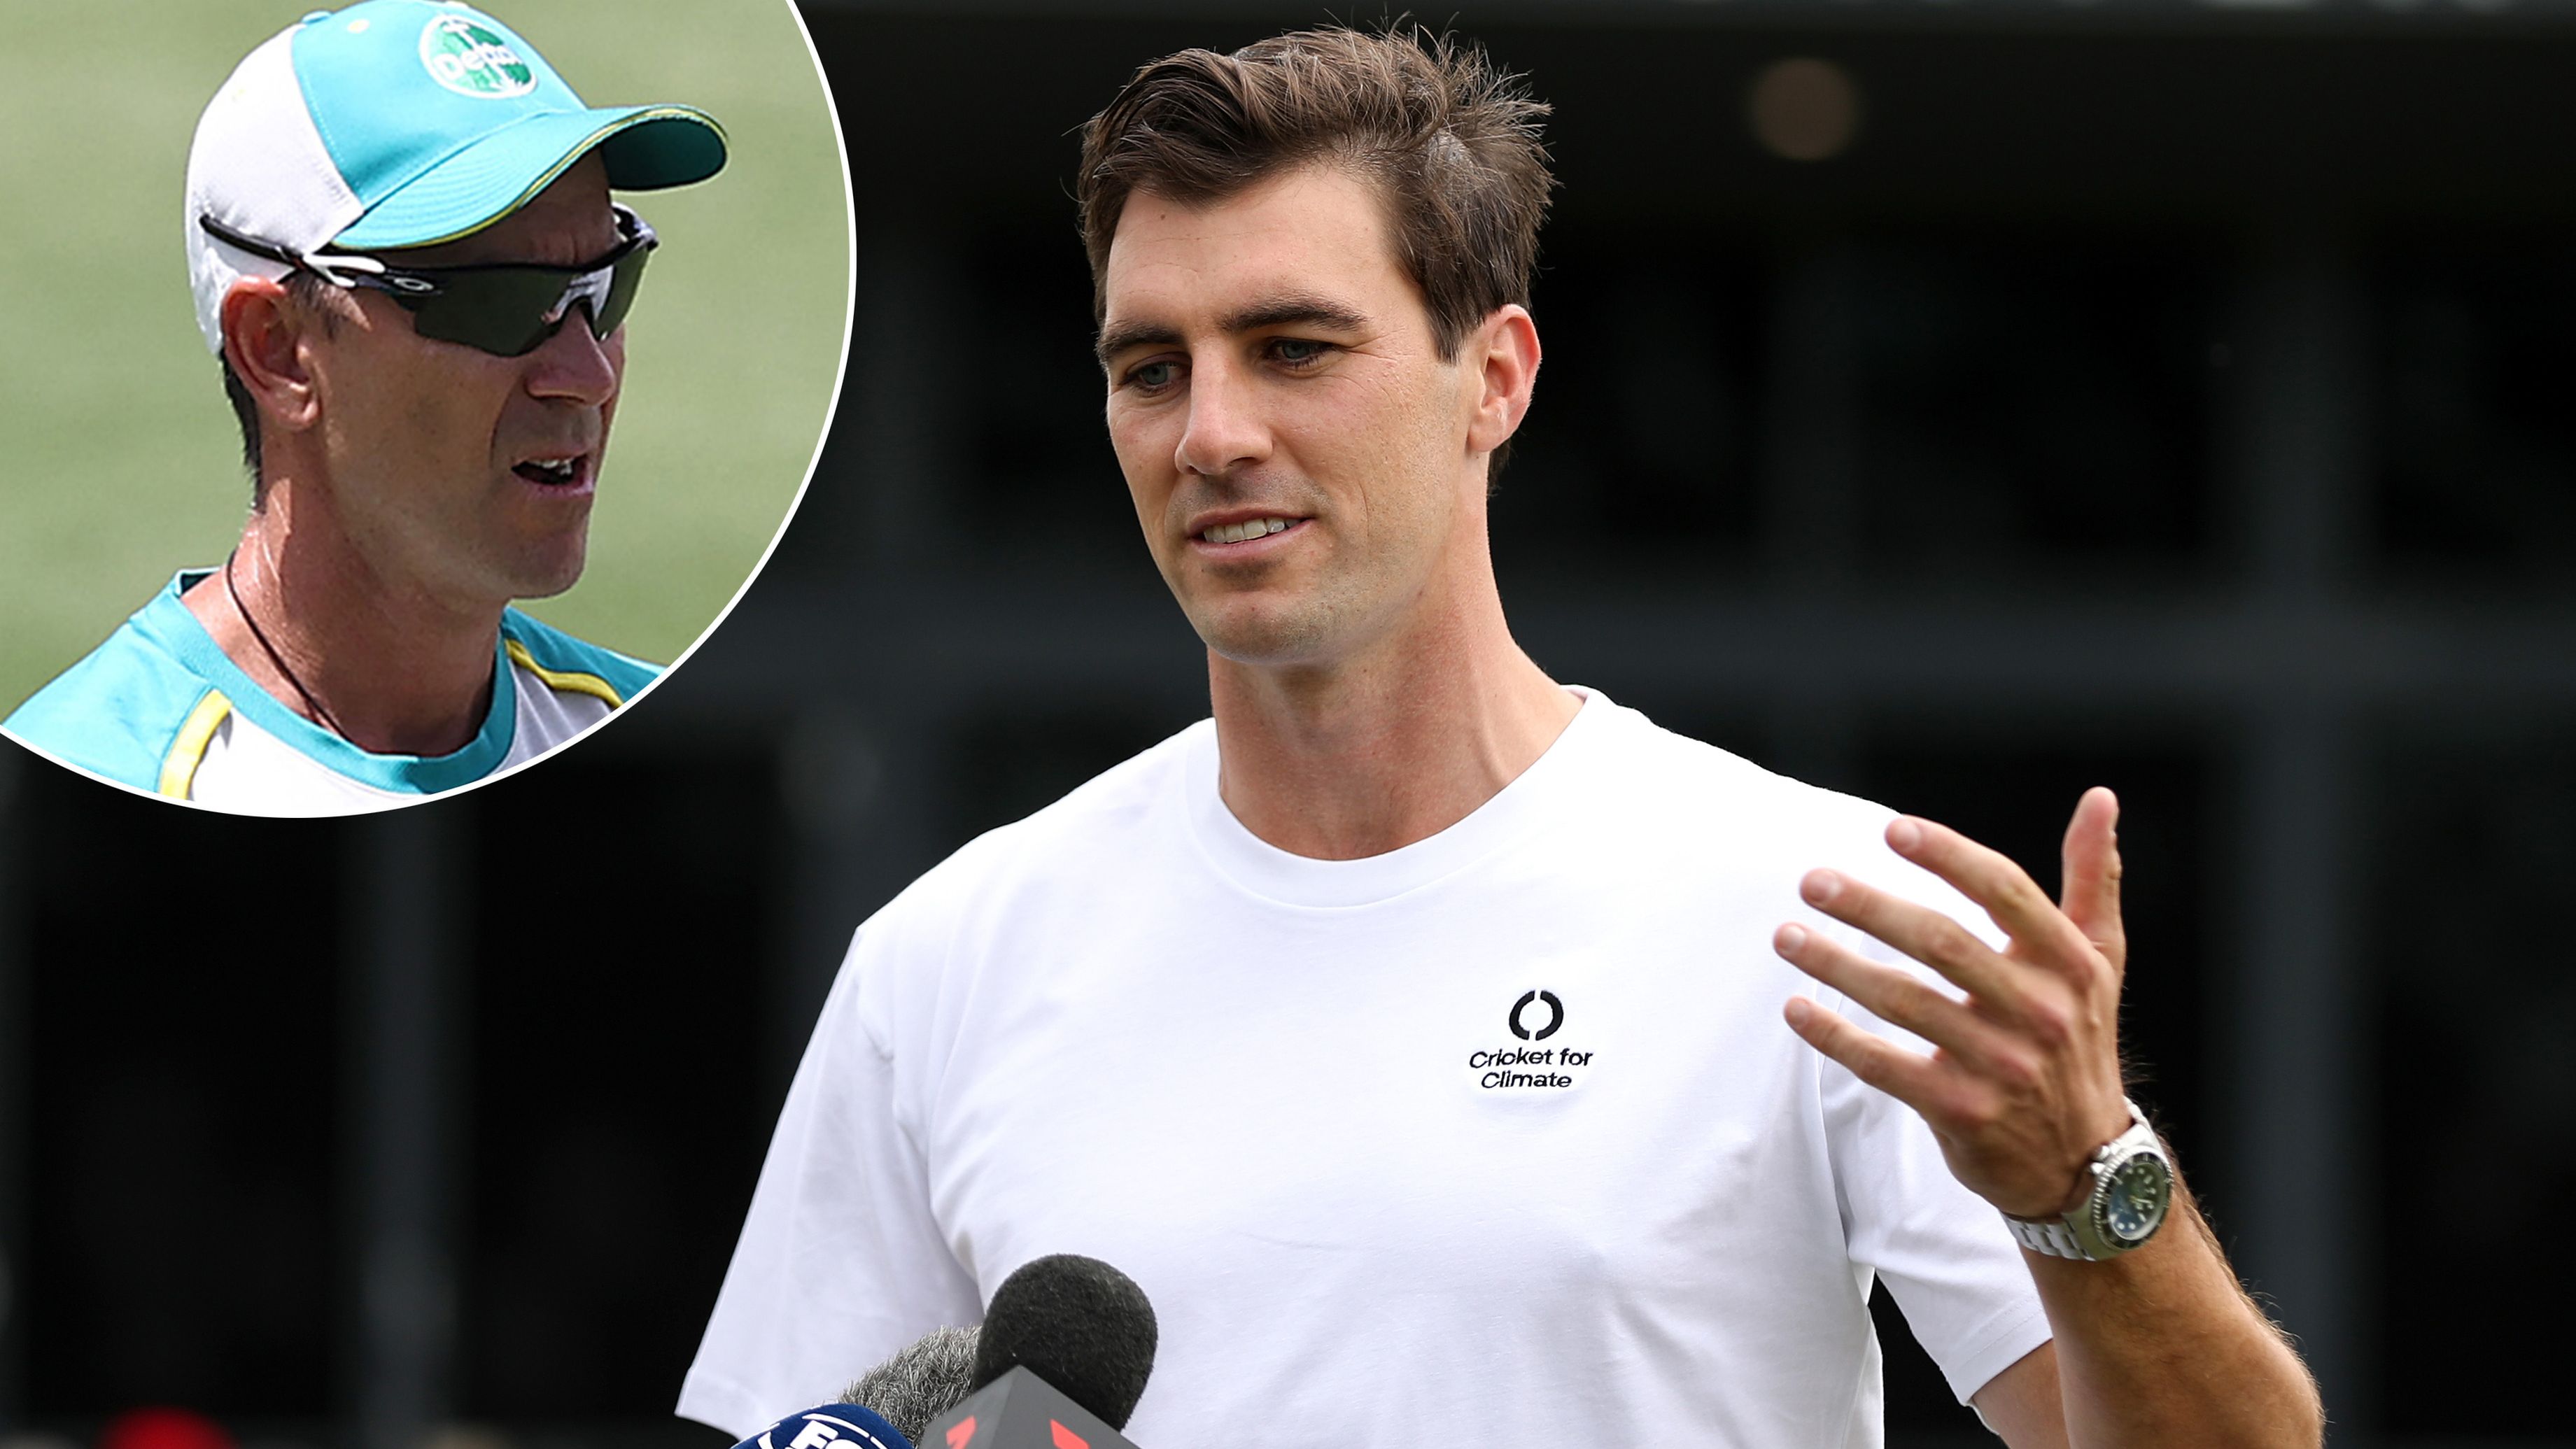 Pat Cummins speaks out over Justin Langer's 'cowards' slight, responds to 'too woke' accusation